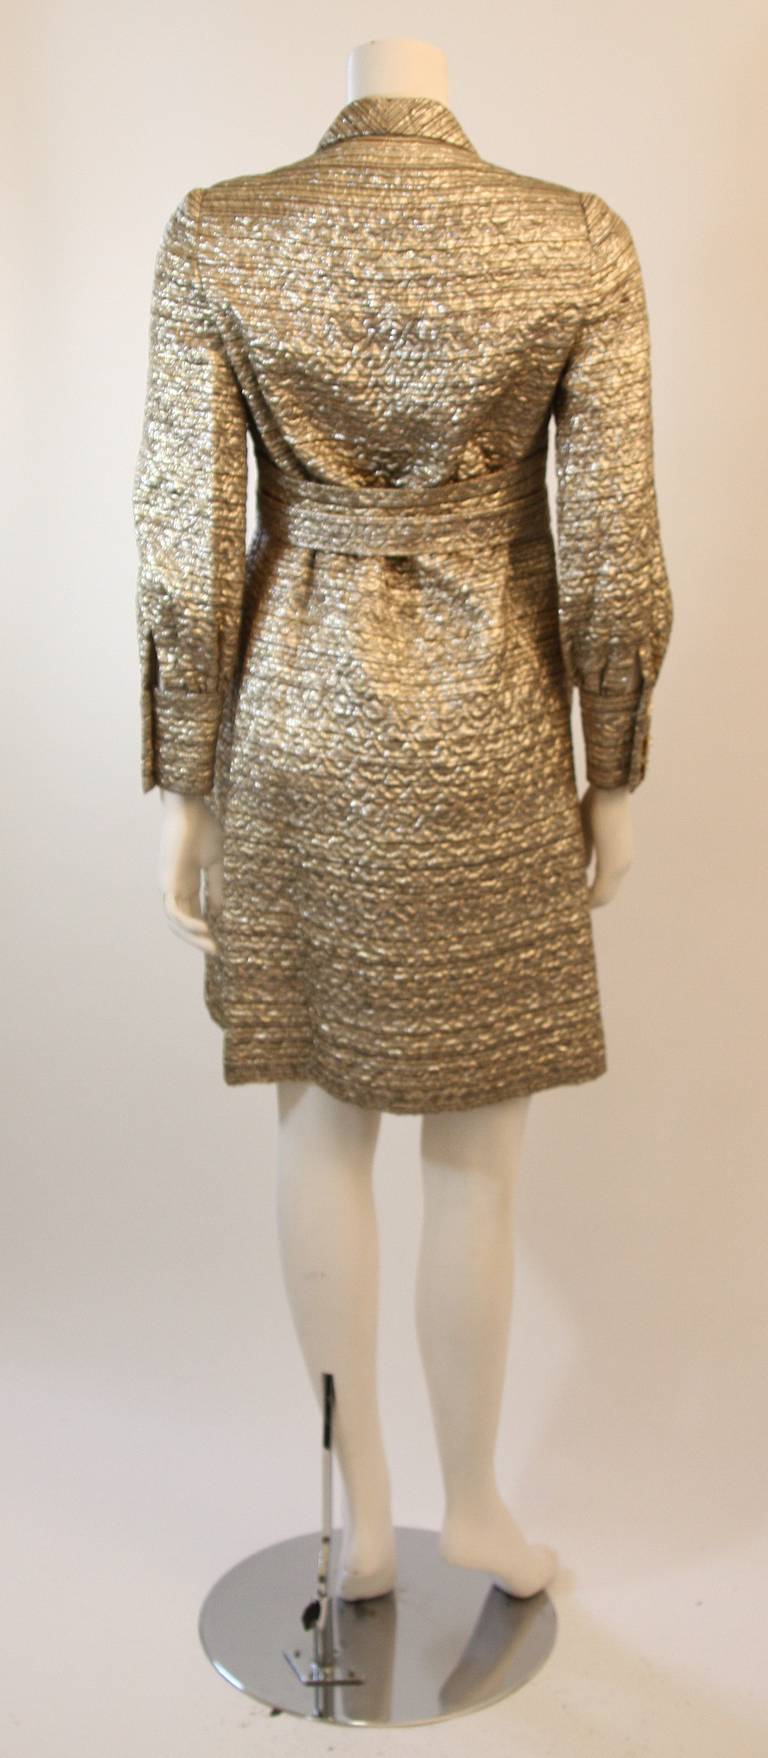 Malcolm Starr Metallic Gold Dress Coat with Rhinestone Buttons For Sale 2